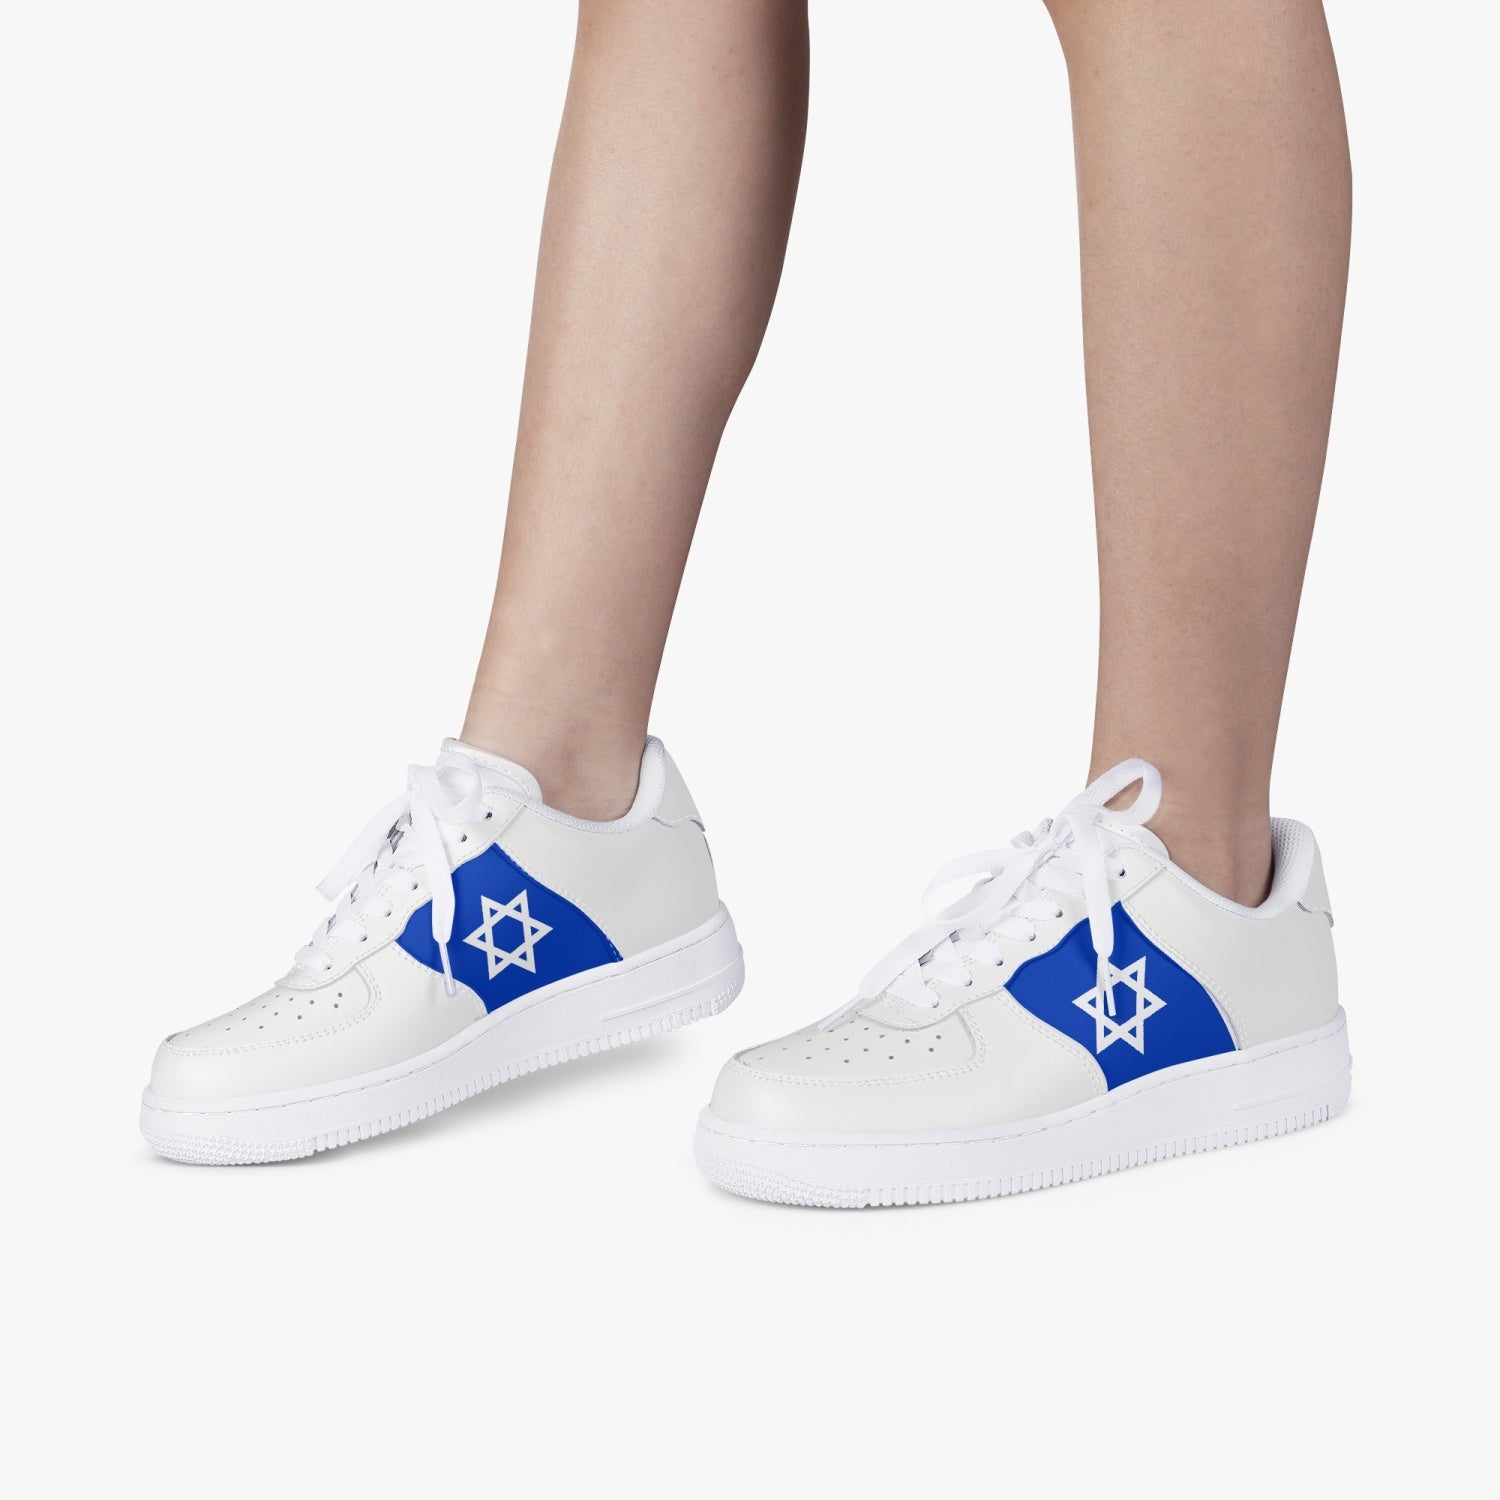 Israeli Flag White Leather Sneakers woman wearing